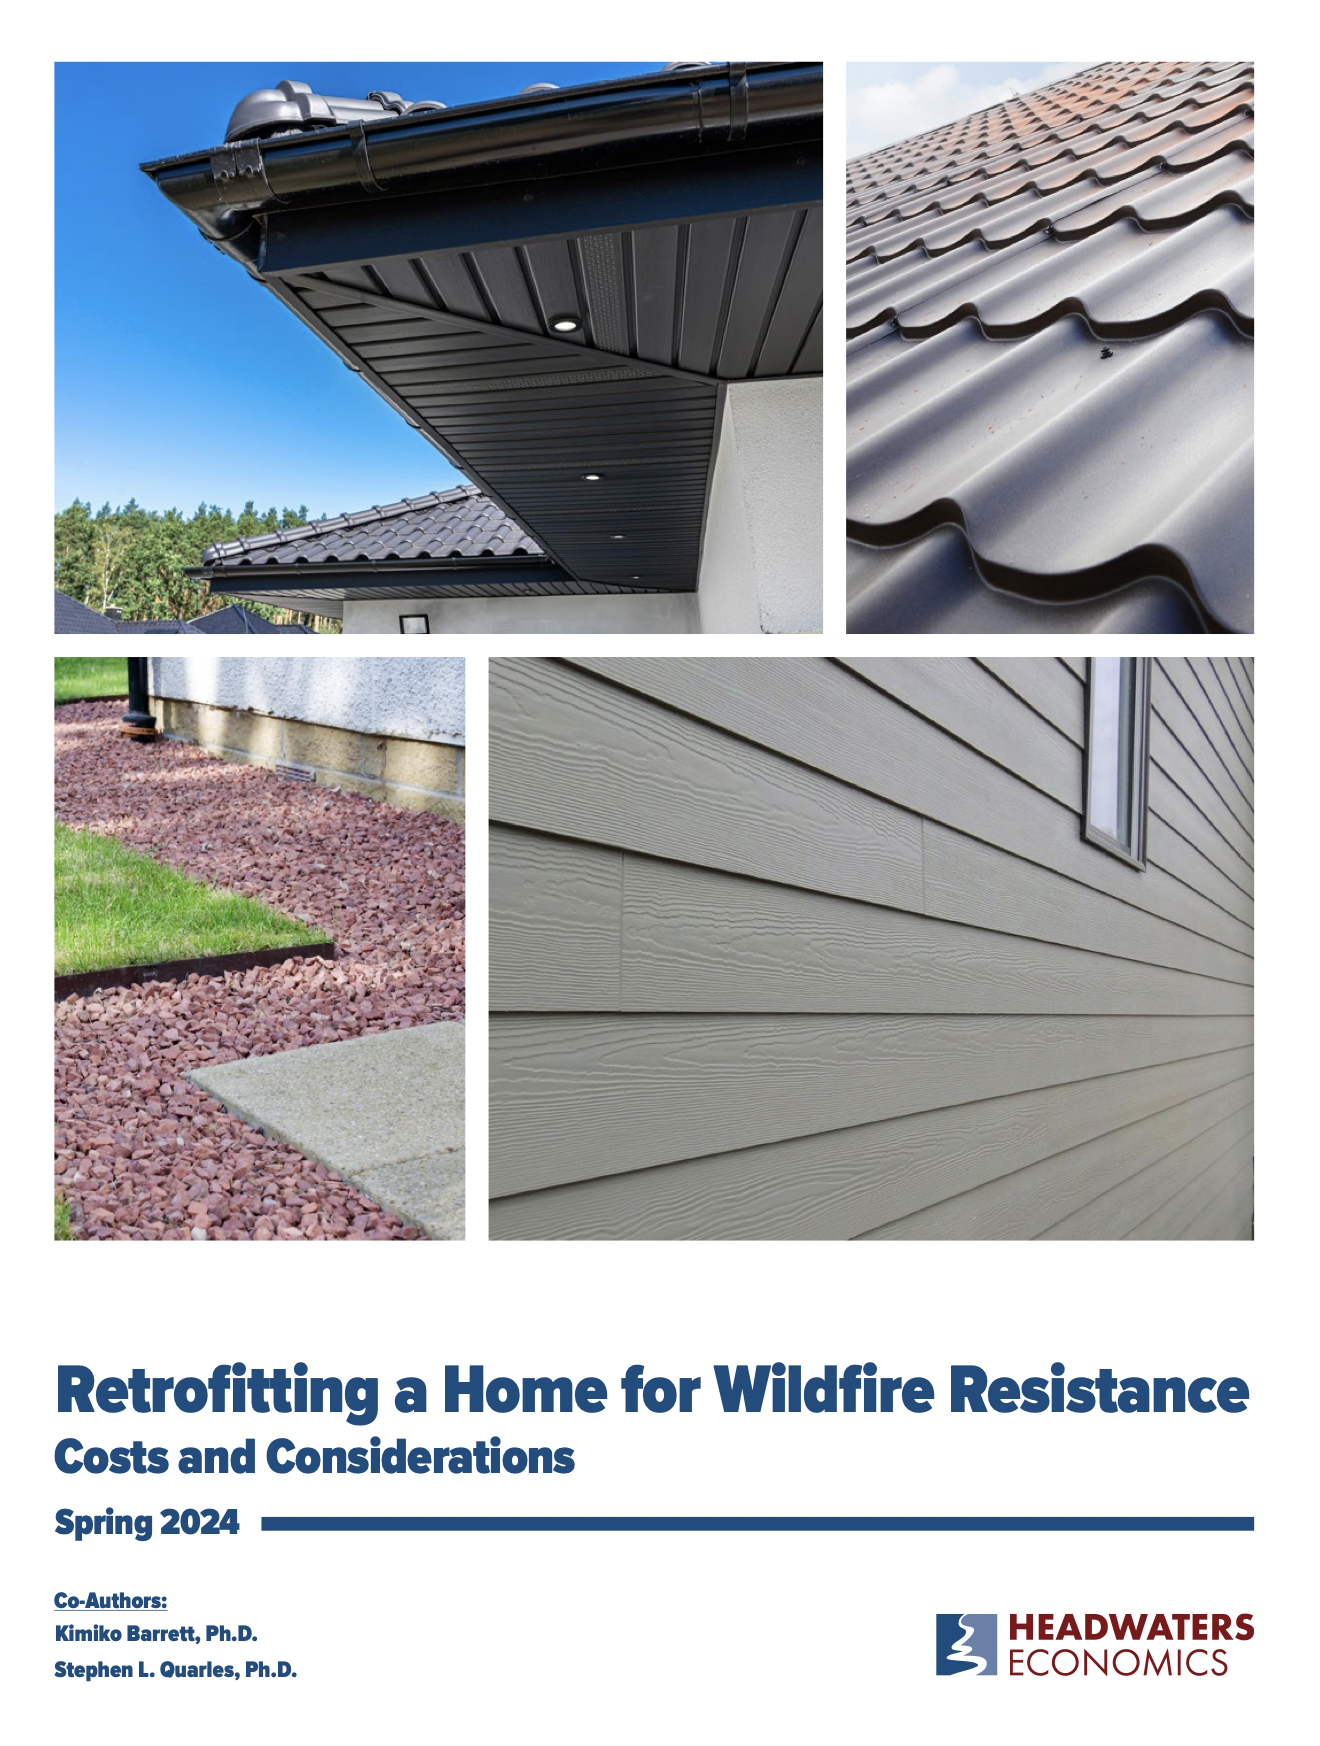 The Cost of Retrofitting a Home for Wildfire Resistance